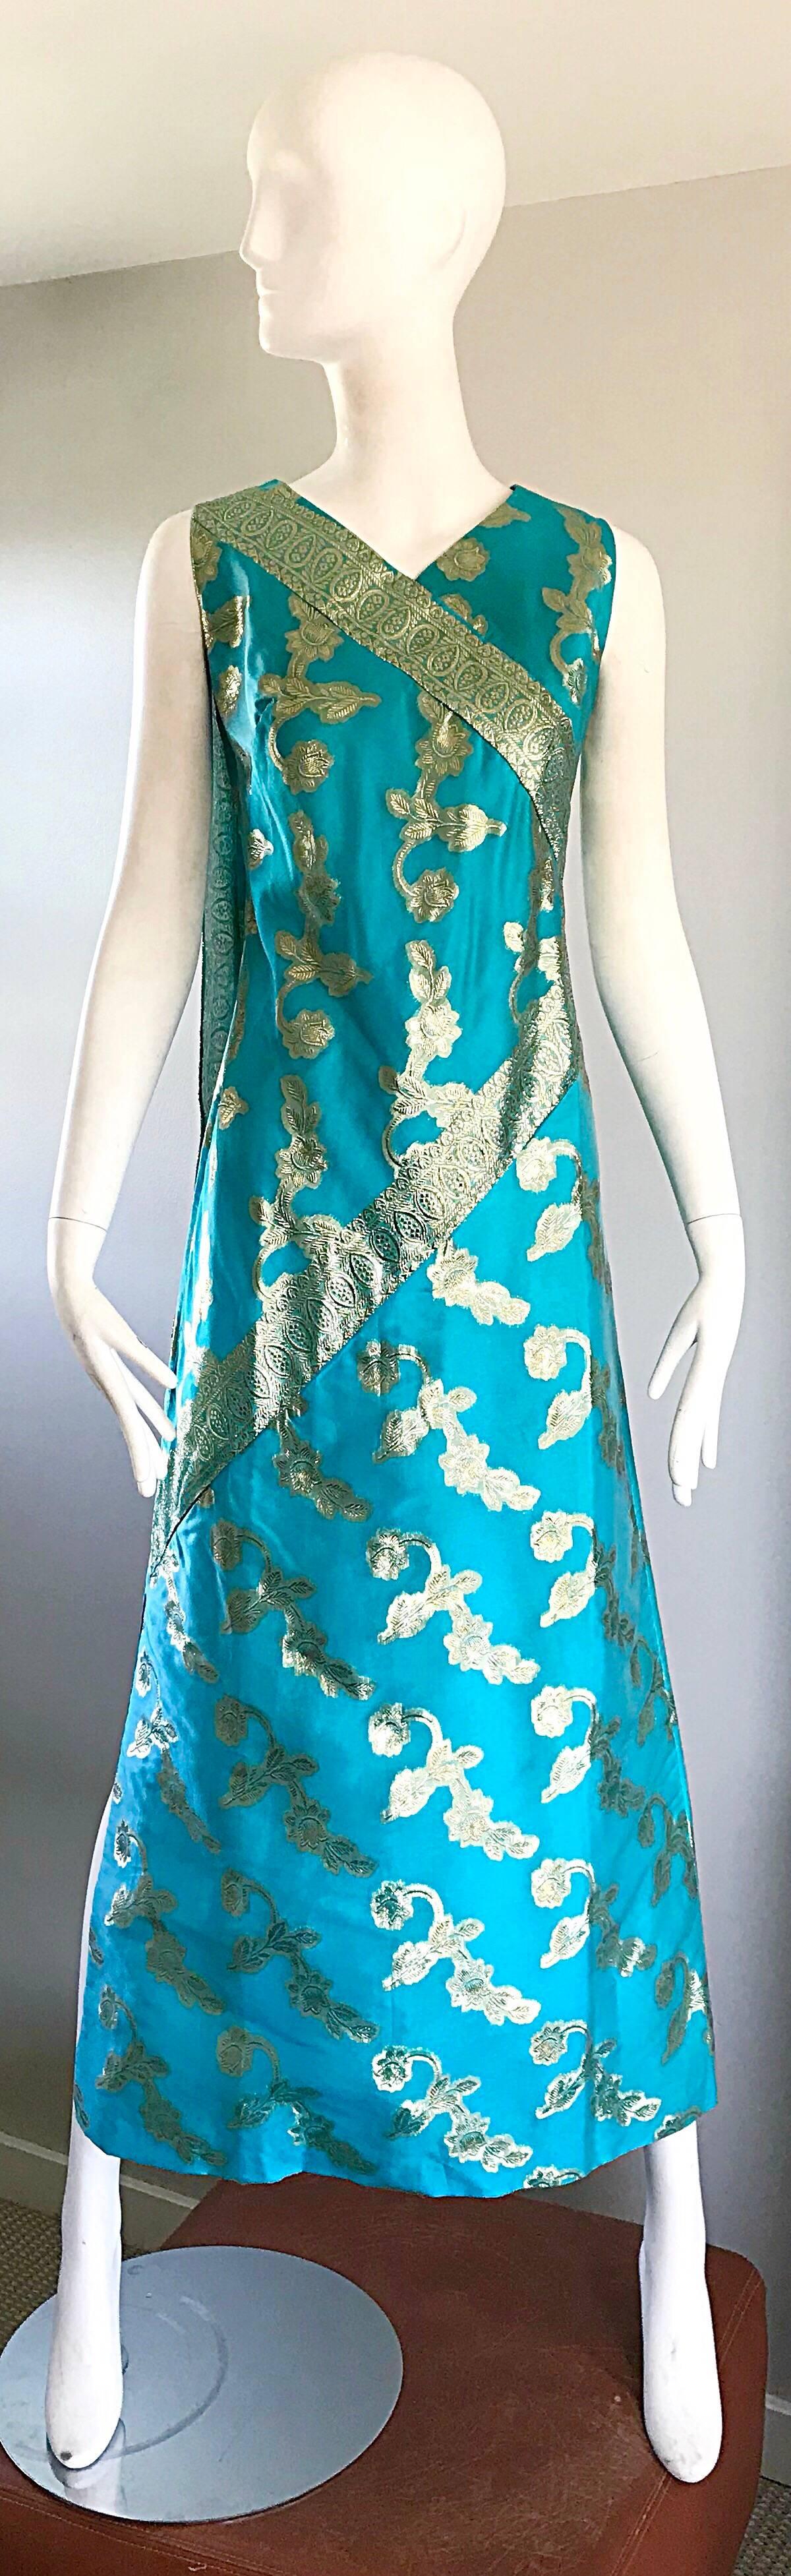 Amazing 1960s WALTAH CLARKE'S turquoise blue and gold metallic ethnic maxi dress! Features a fitted bodice, with an attached sash on top back right shoulder. Full metal zipper up the back with hook-and-eye closure. Fully lined. Perfect with sandals,